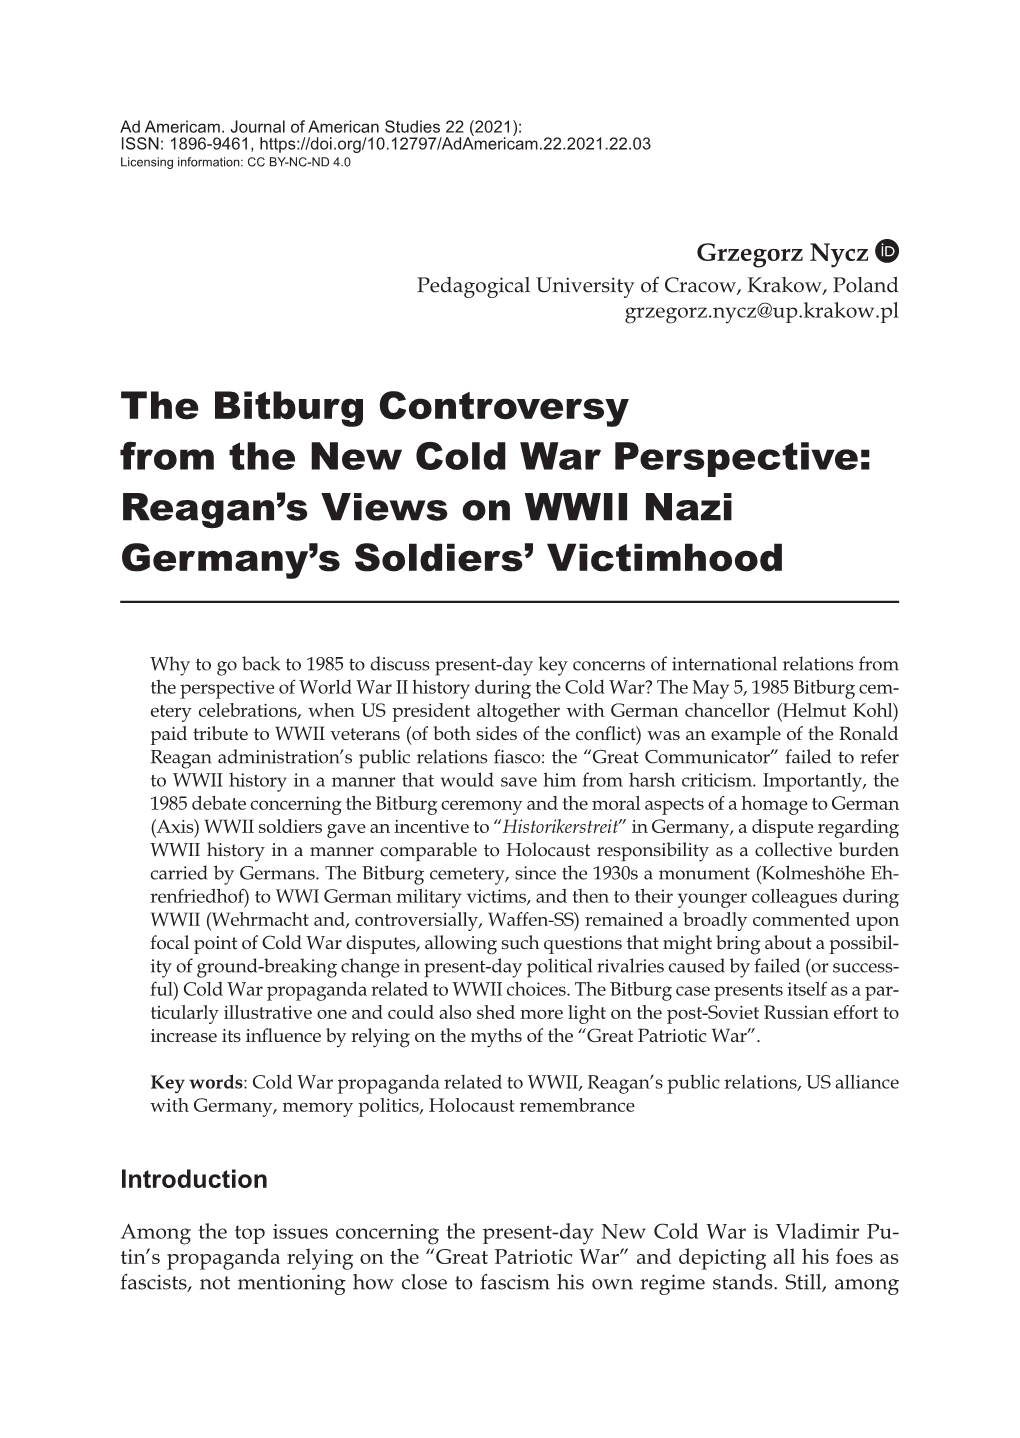 The Bitburg Controversy from the New Cold War Perspective: Reagan's Views on WWII Nazi Germany's Soldiers' Victimhood